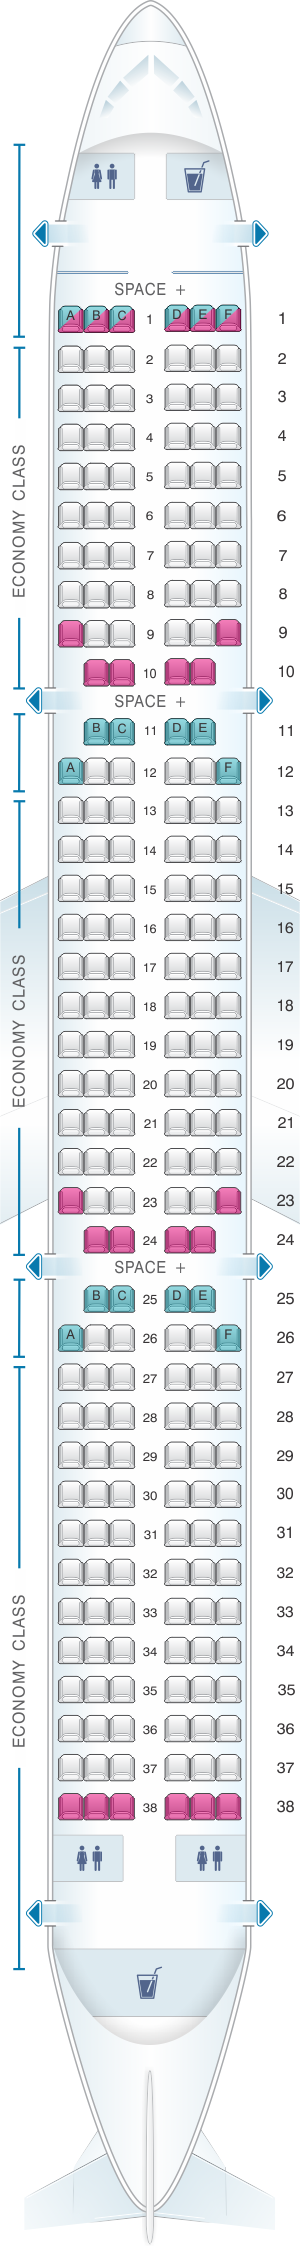 Seat map for LATAM Airlines Brasil Airbus A321